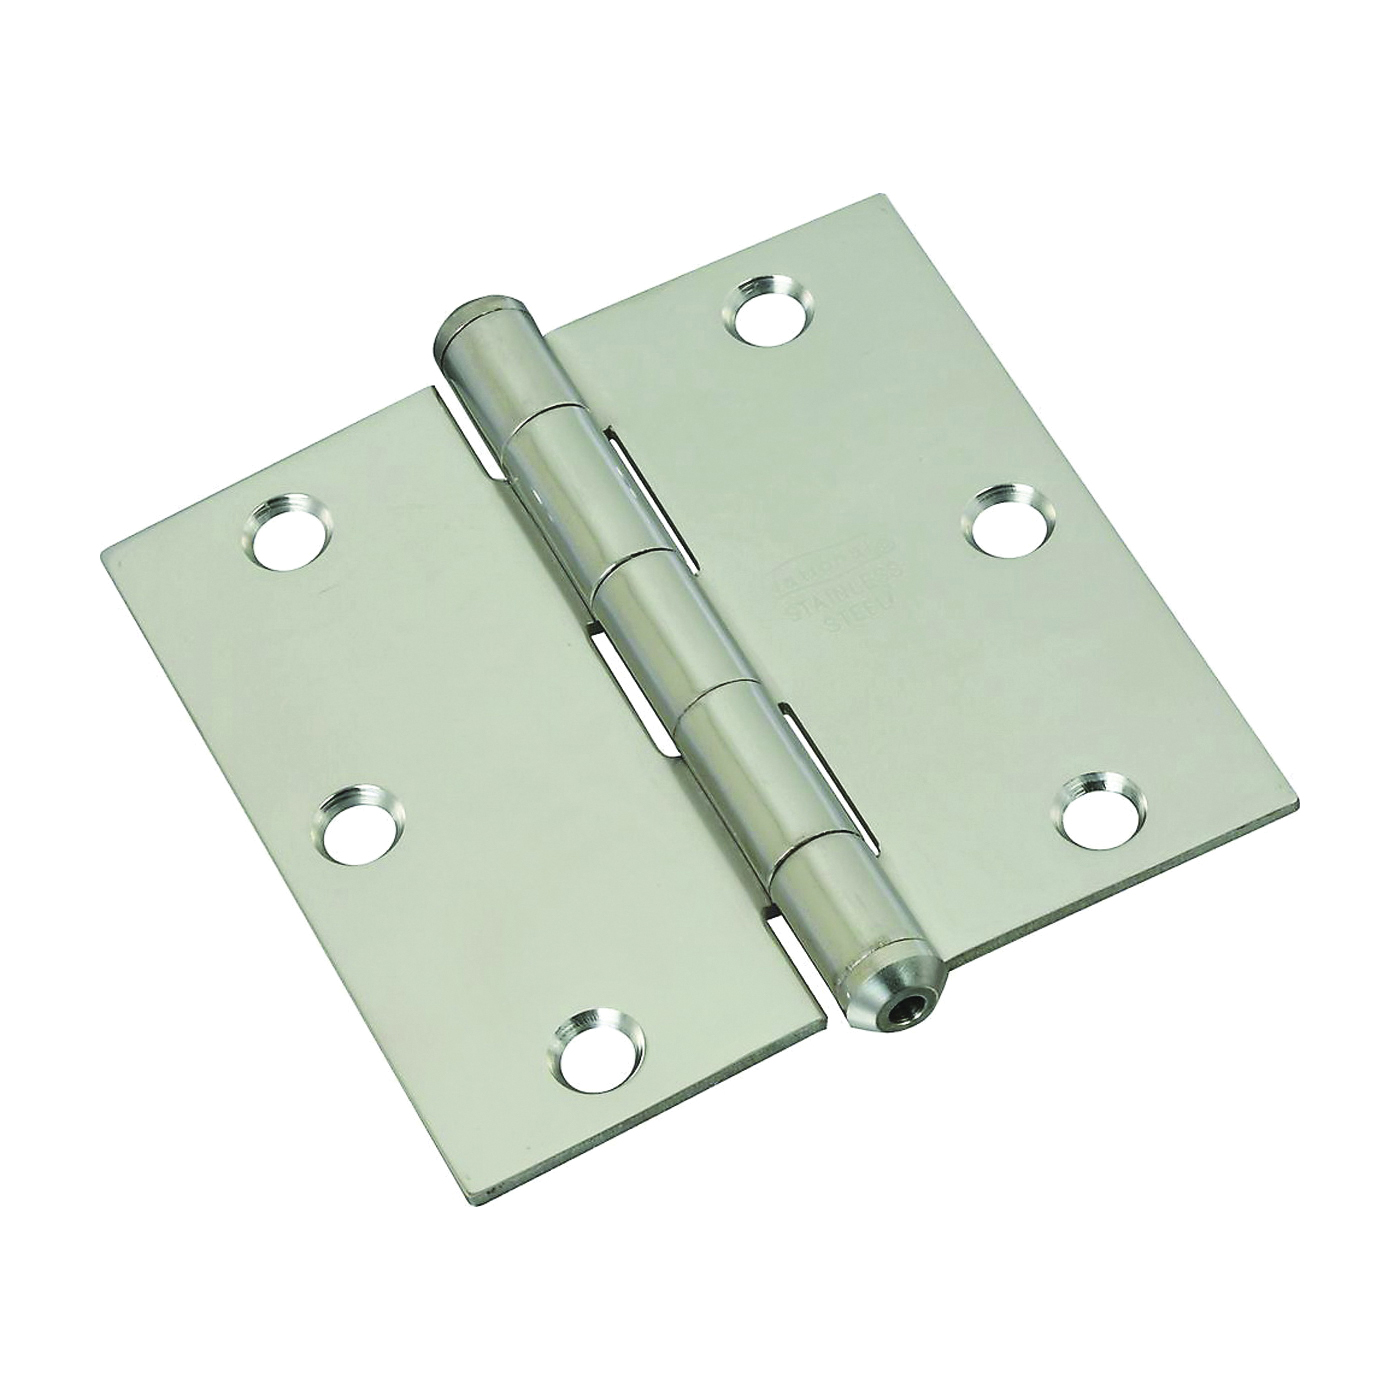 N830-277 Square Corner Door Hinge, Stainless Steel, Zinc, Non-Rising, Removable Pin, 50 lb